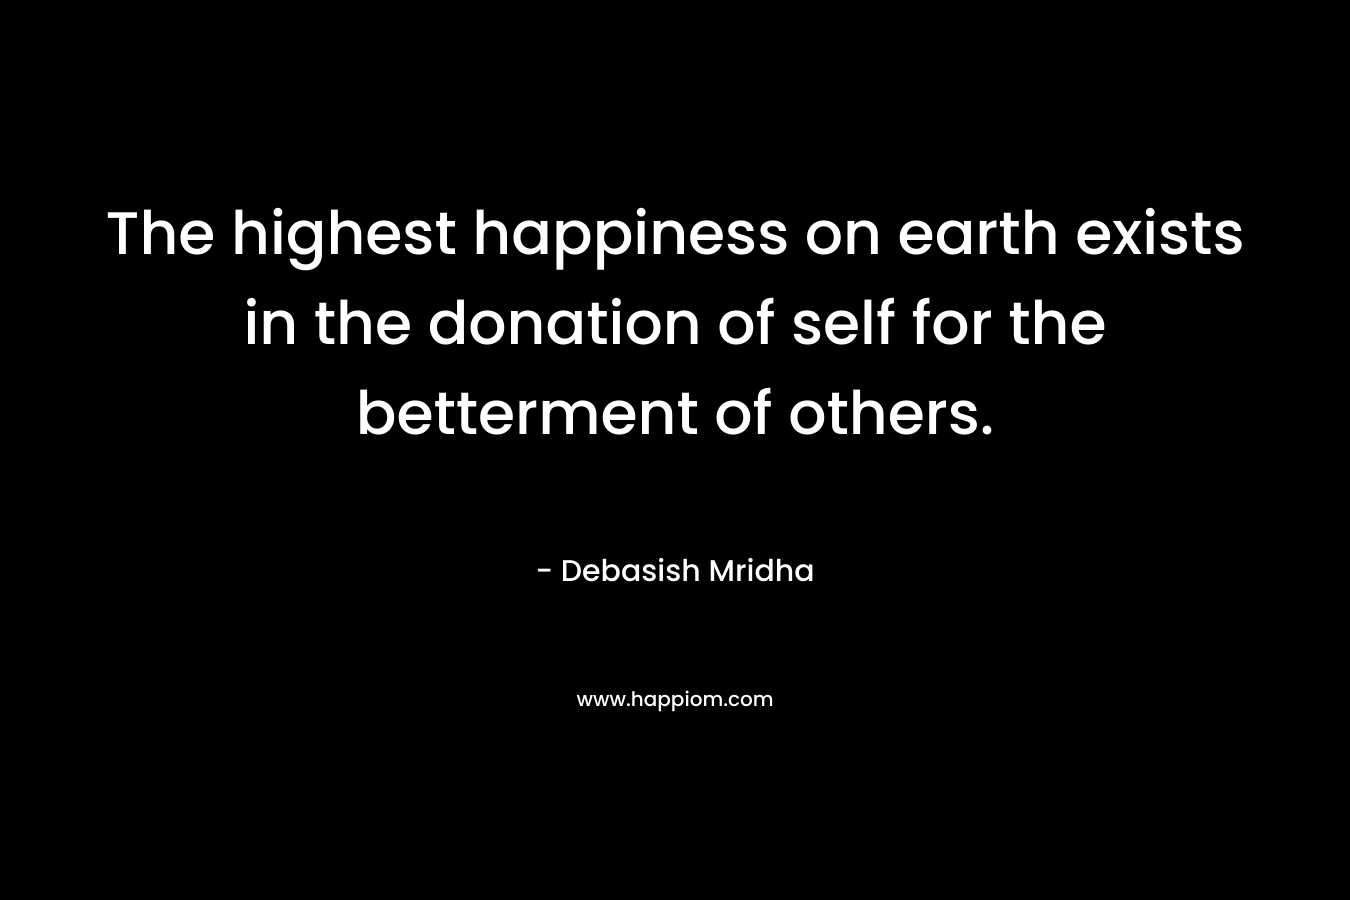 The highest happiness on earth exists in the donation of self for the betterment of others. – Debasish Mridha